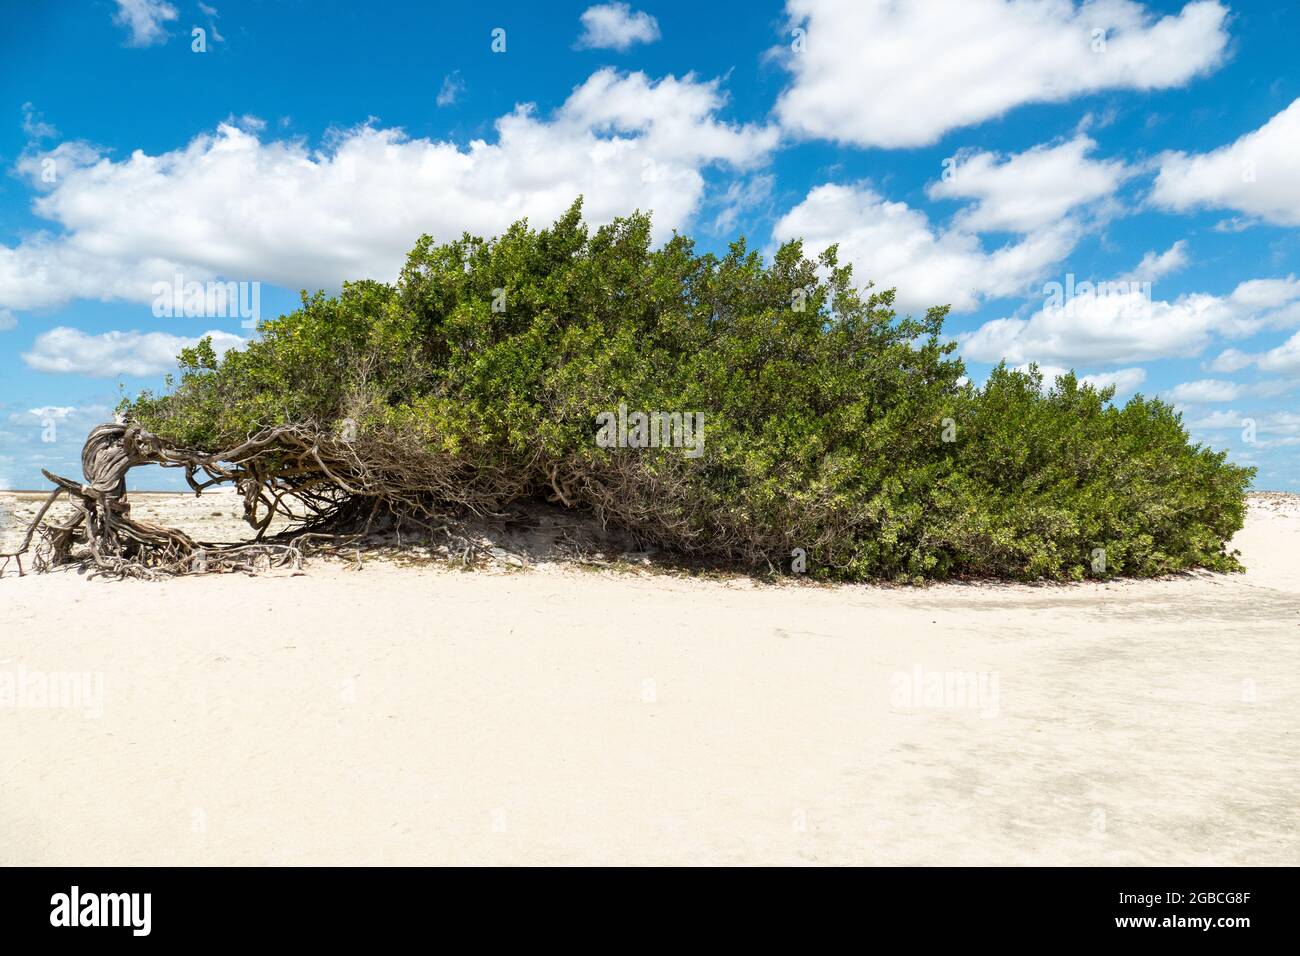 The Laziness Tree is a tree that has been shaped by the action of the wind, bending over the sand of Jericoacoara, State of Ceara, Brazil Stock Photo